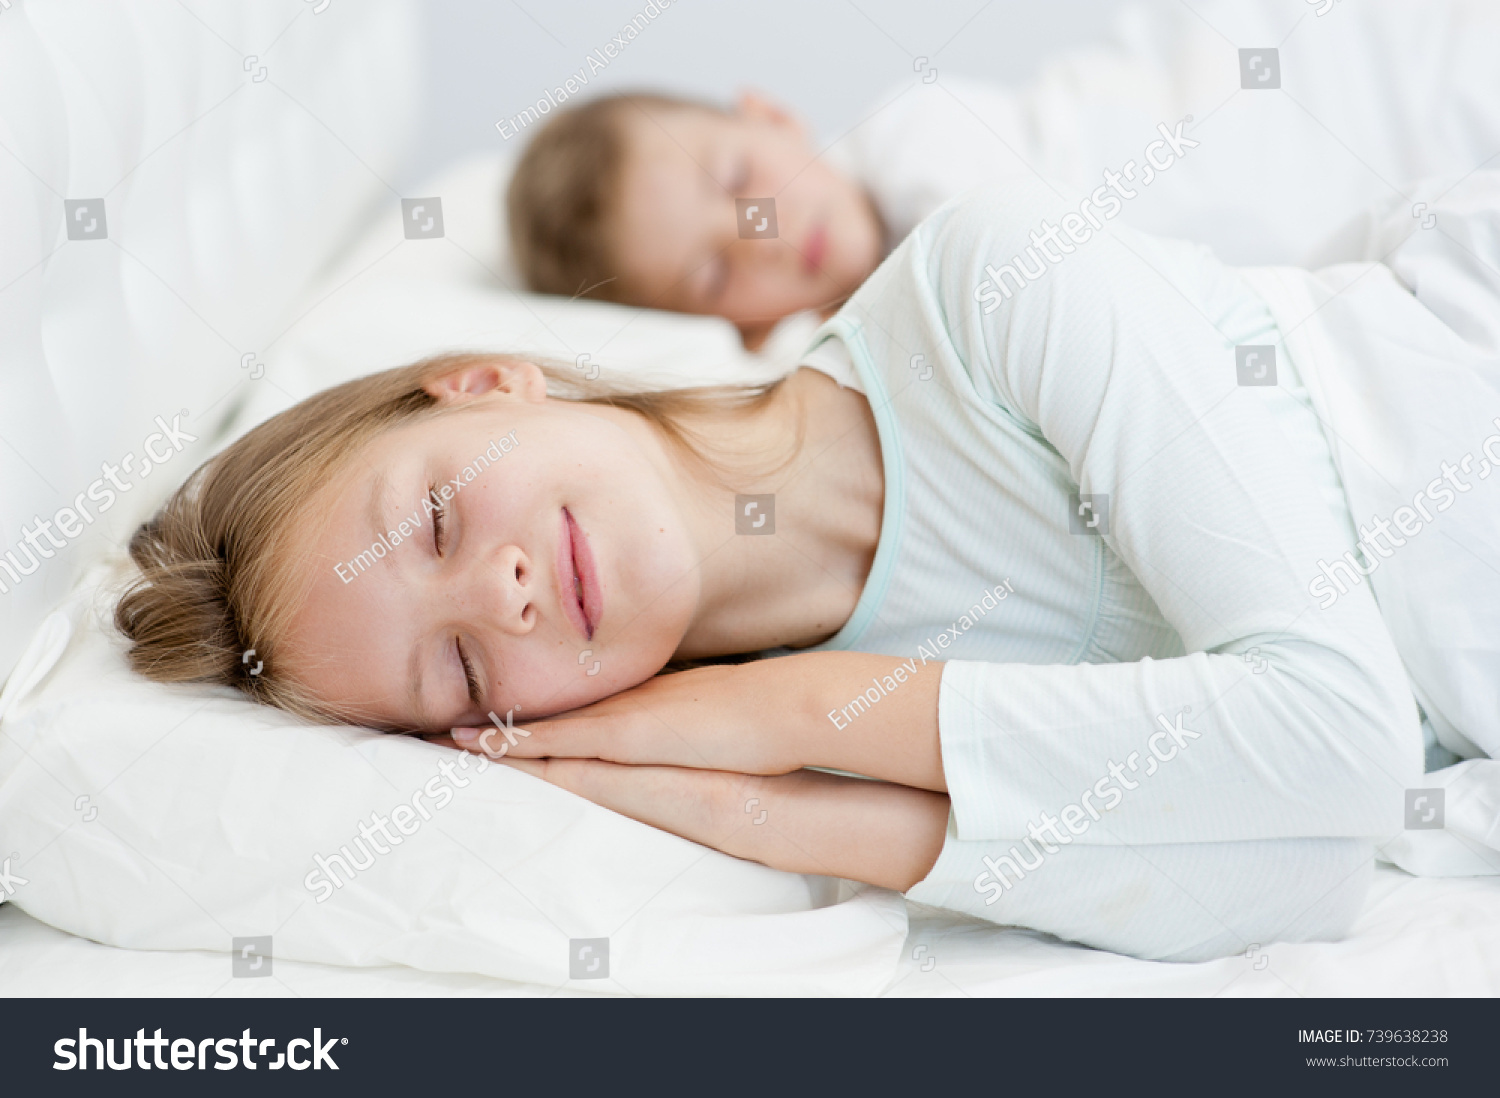 becky felde add photo brother and sister sleeping together